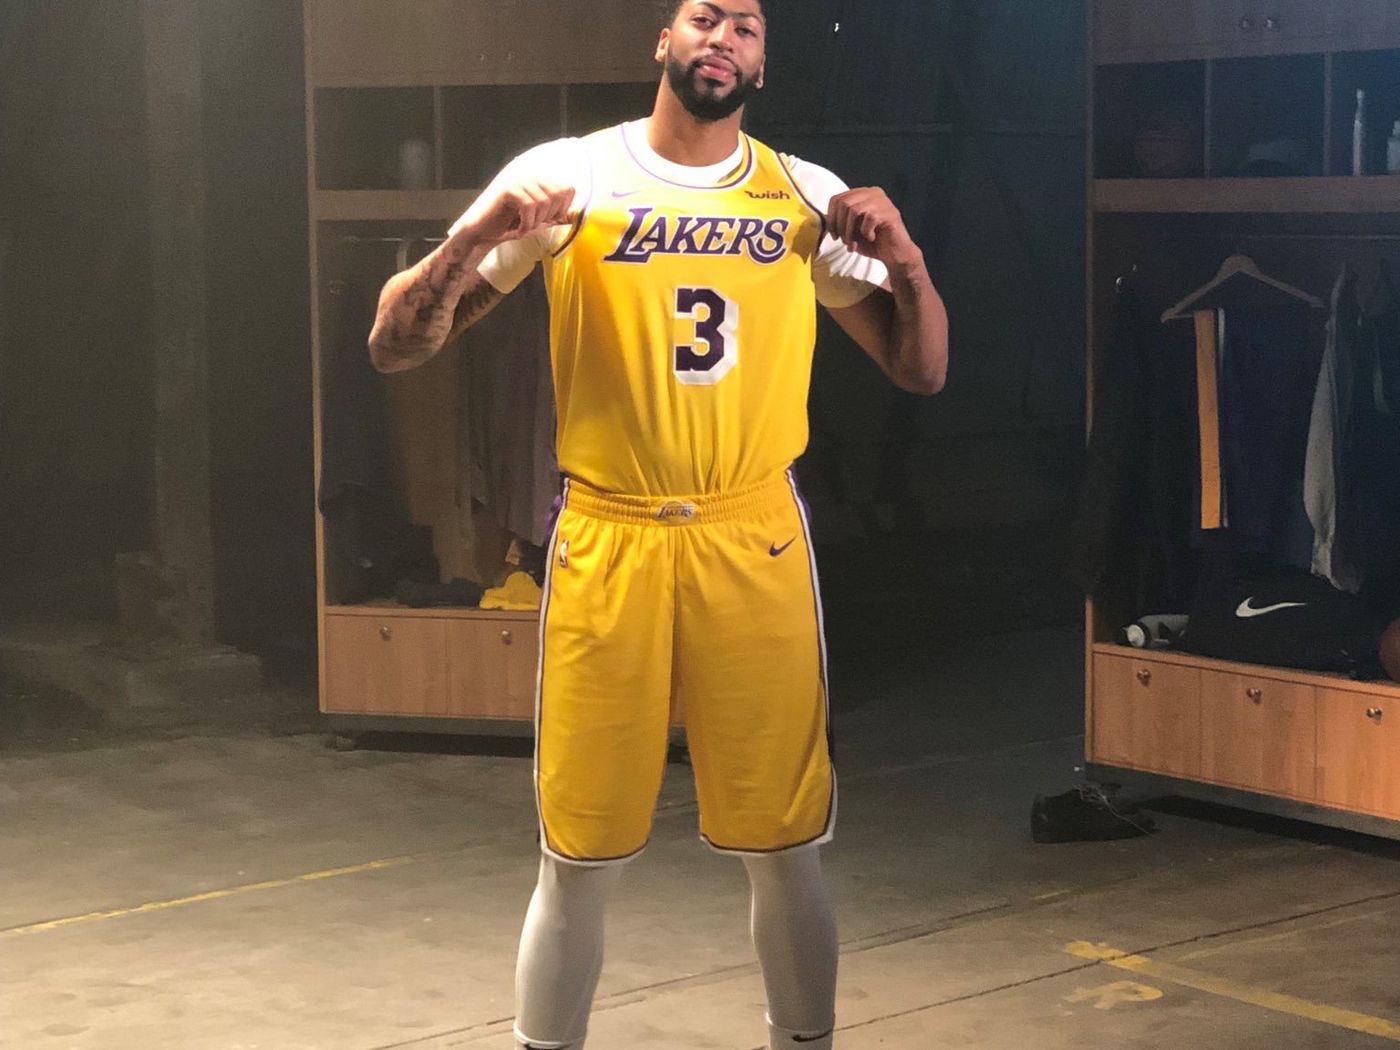 NBA 2K gave us our first look at Anthony Davis in new Lakers